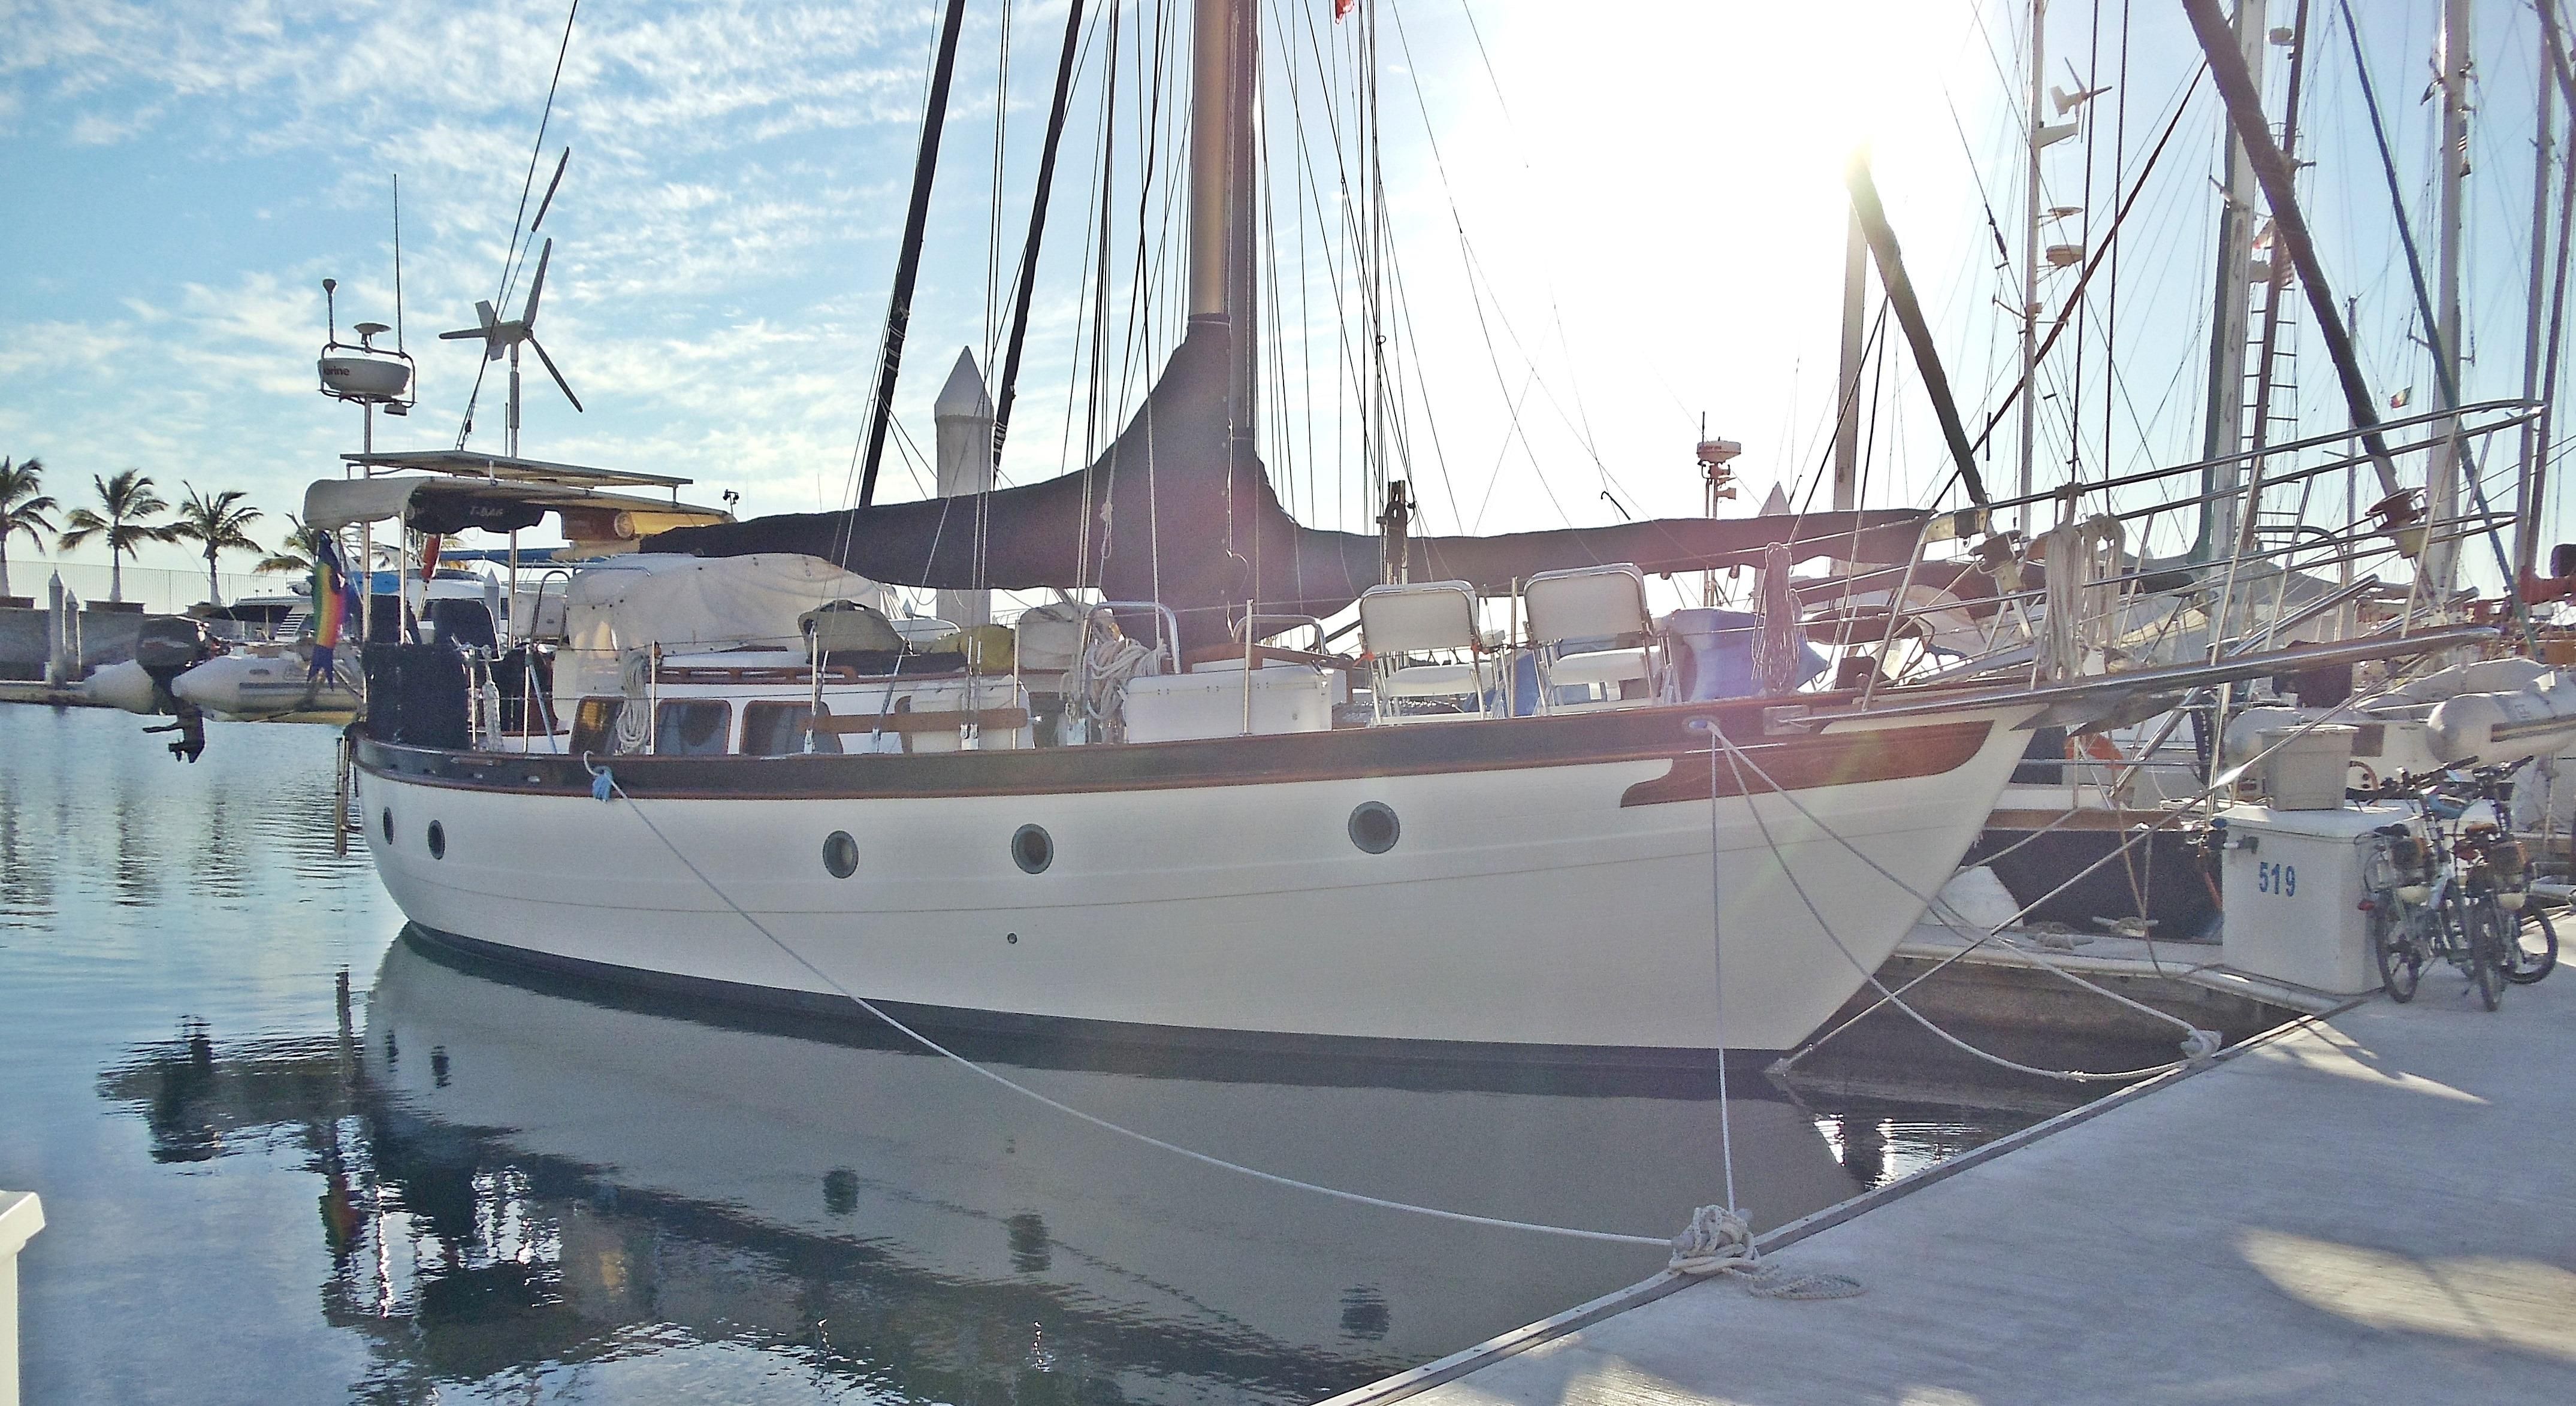 1981 Spindrift Pilothouse Cutter Sail Boat For Sale - www ...